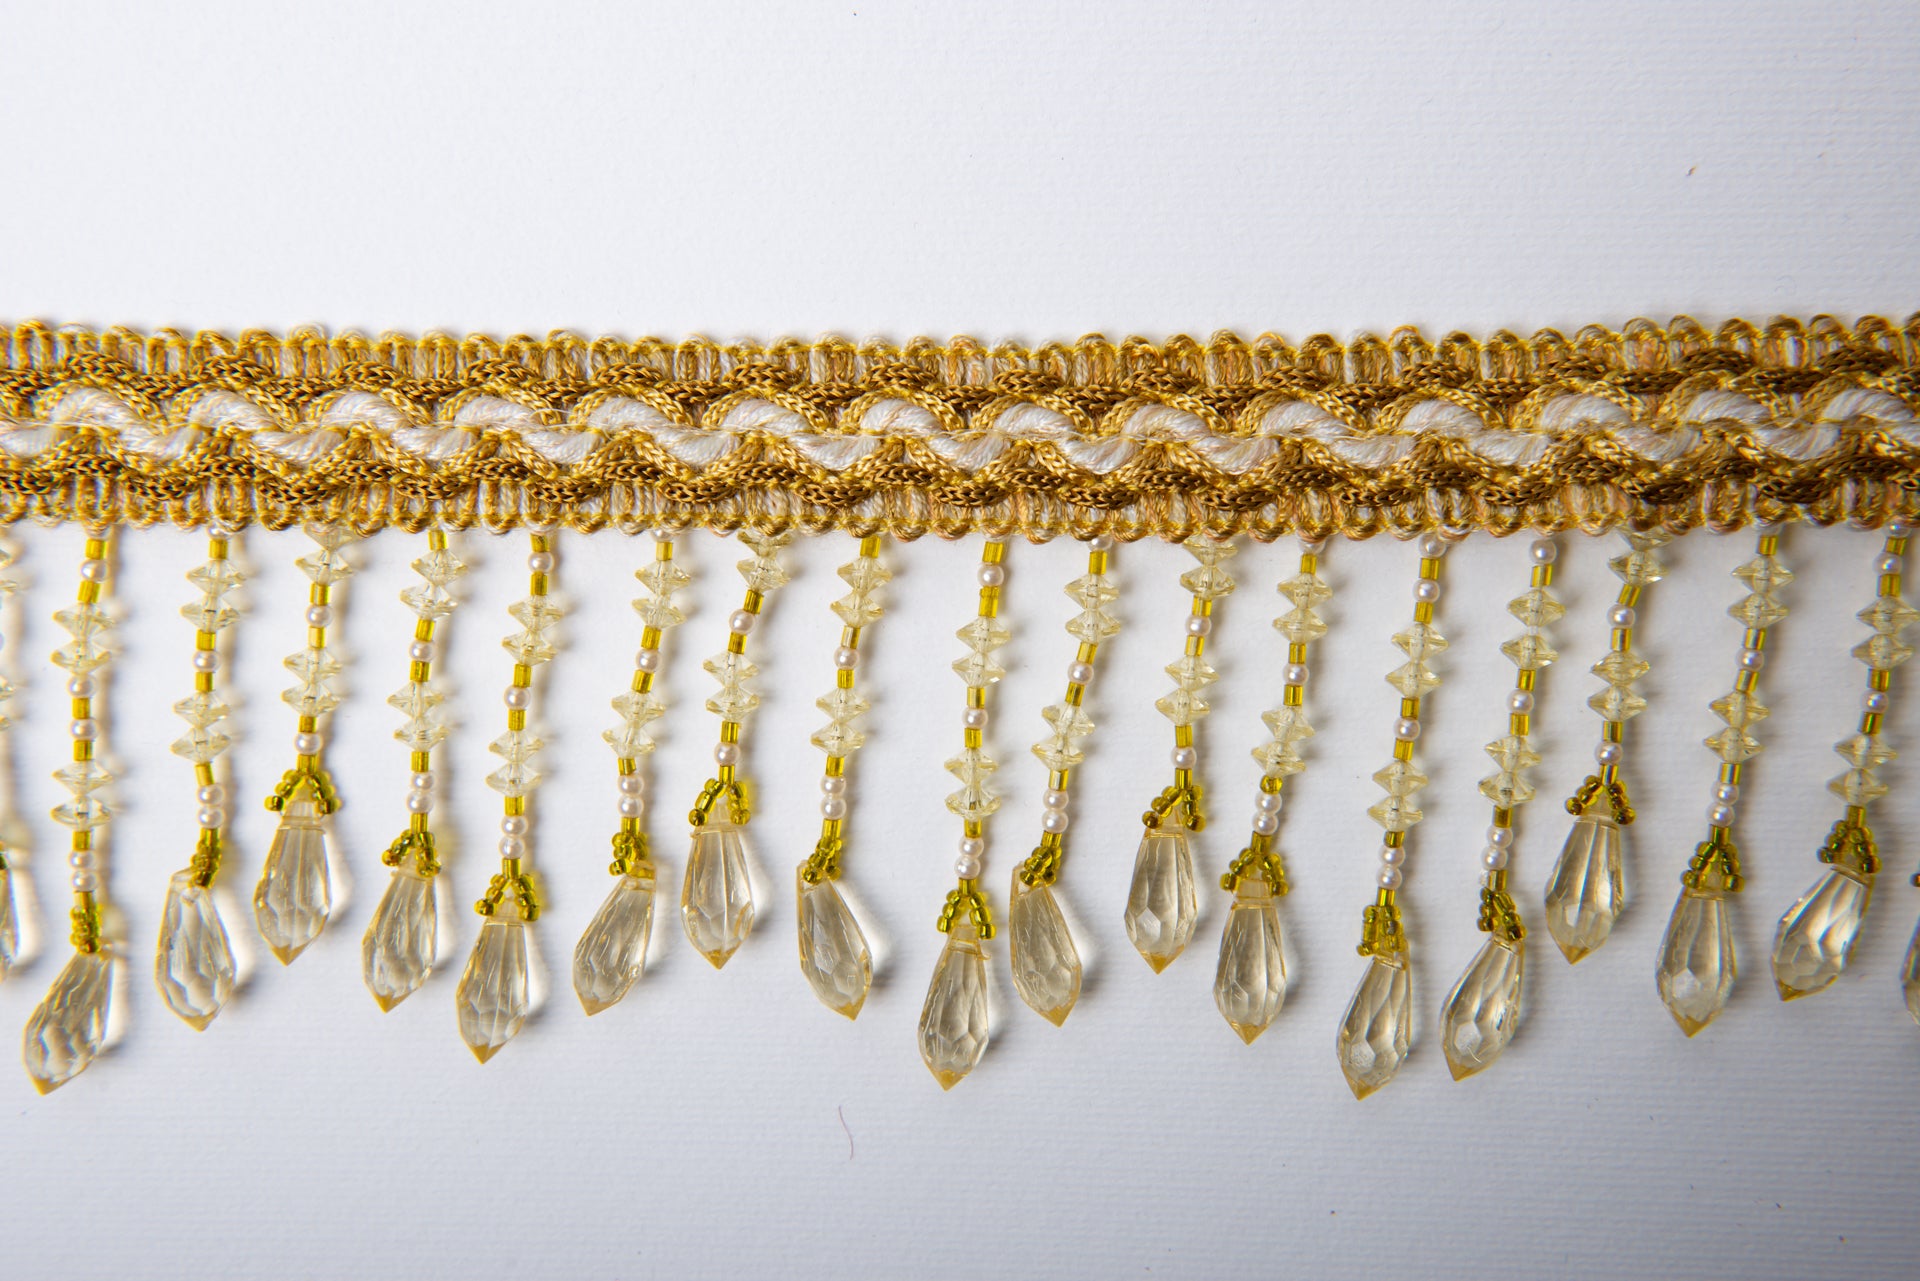 Interesting yellow border or fringe with pendants: wonderful for tents, table covers, bedspreads or any other idea.